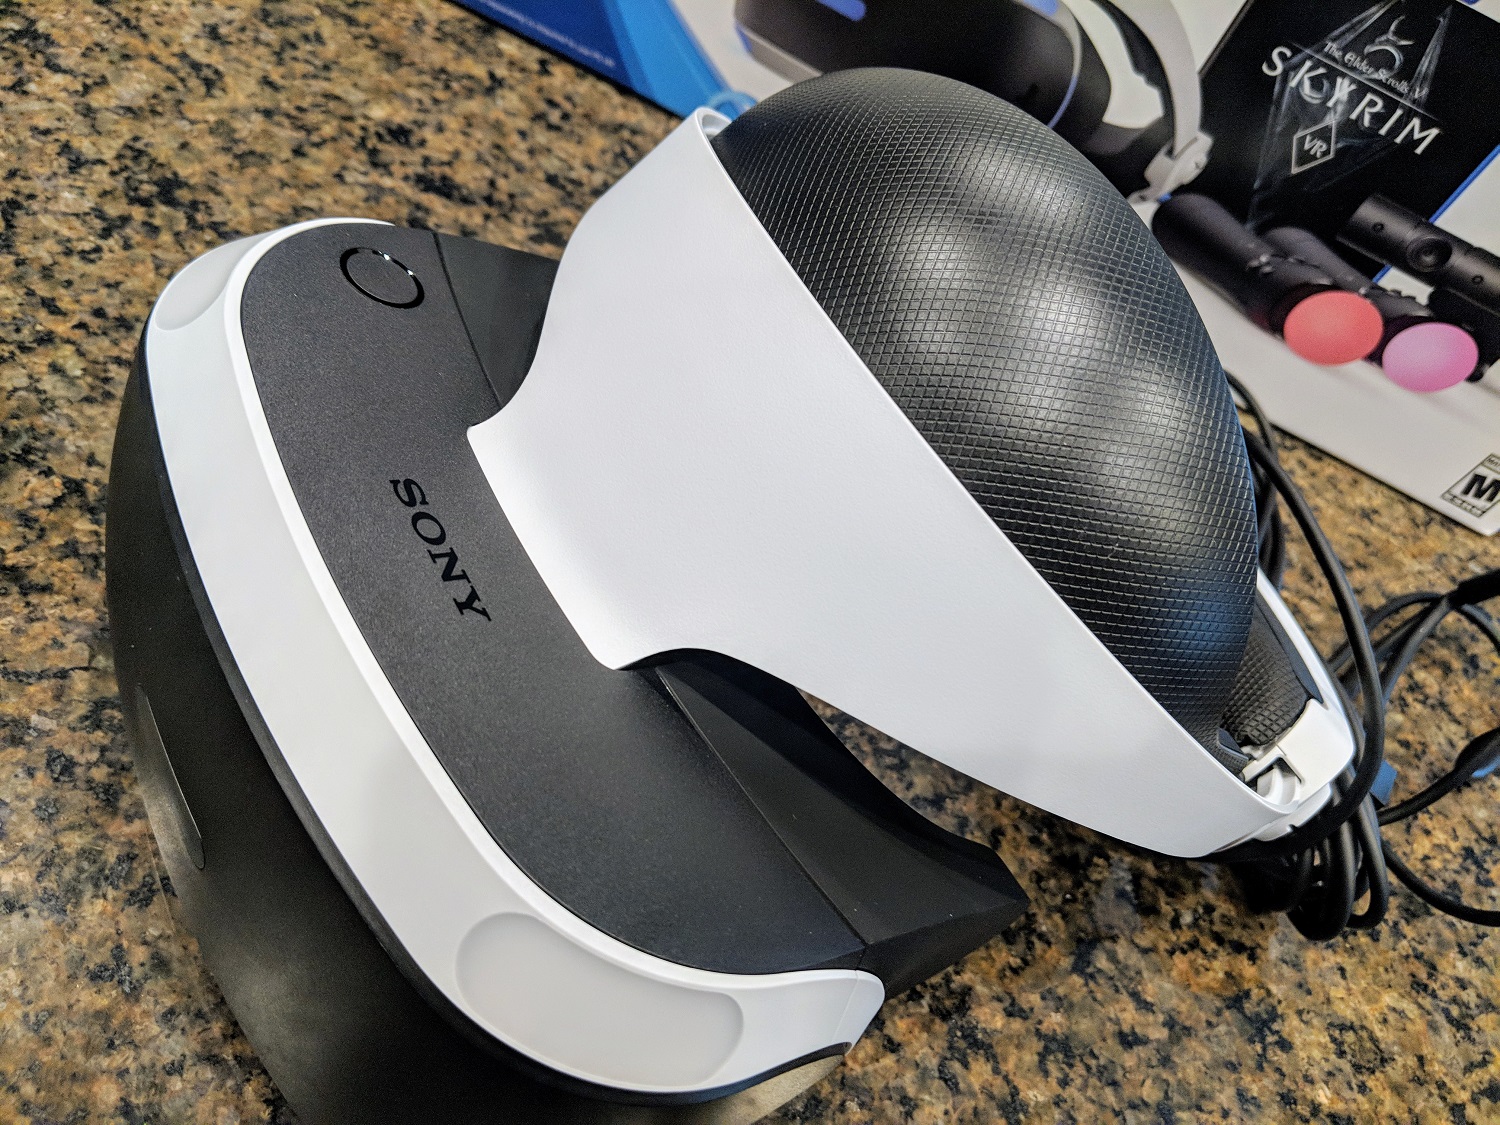 PlayStation VR Review: The Future of Console Gaming Has Arrived (Nov. 2017  Update)